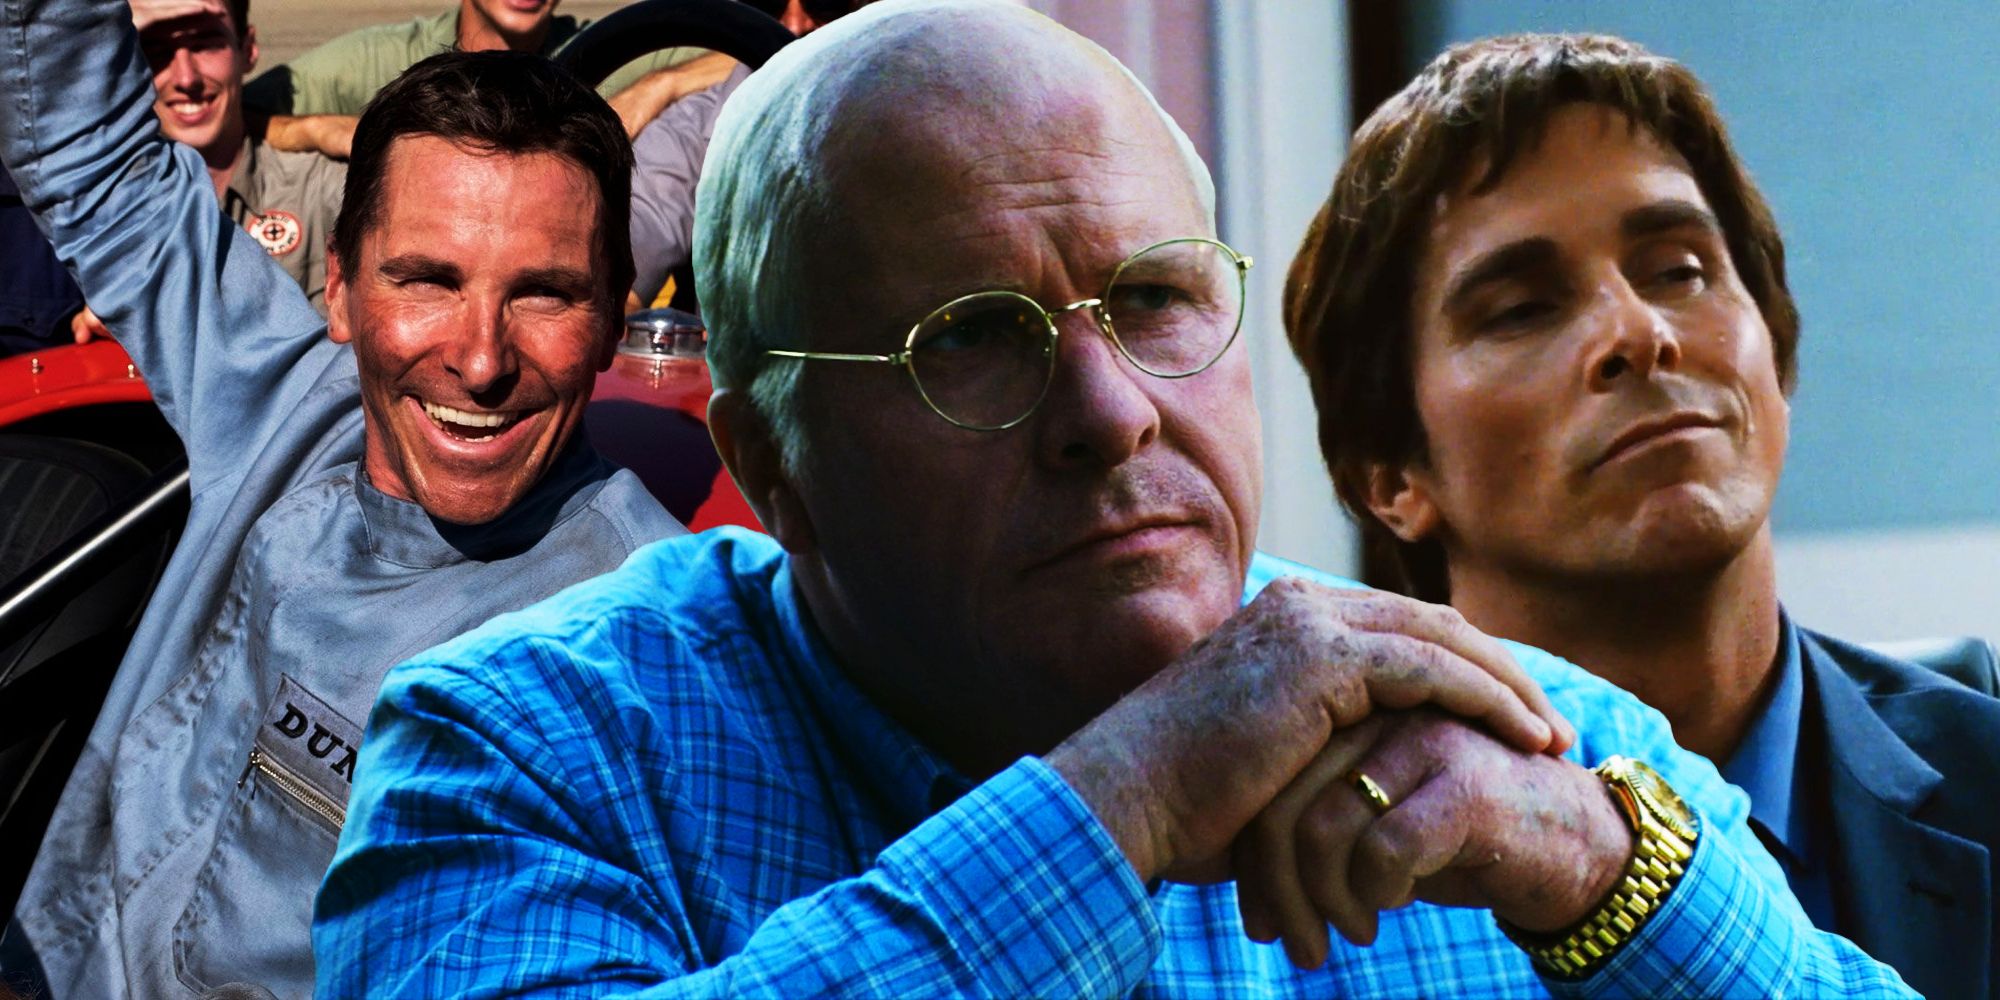 Christian Bale’s Most Famous Roles Captured In Collage That Highlights His Extreme Transformations